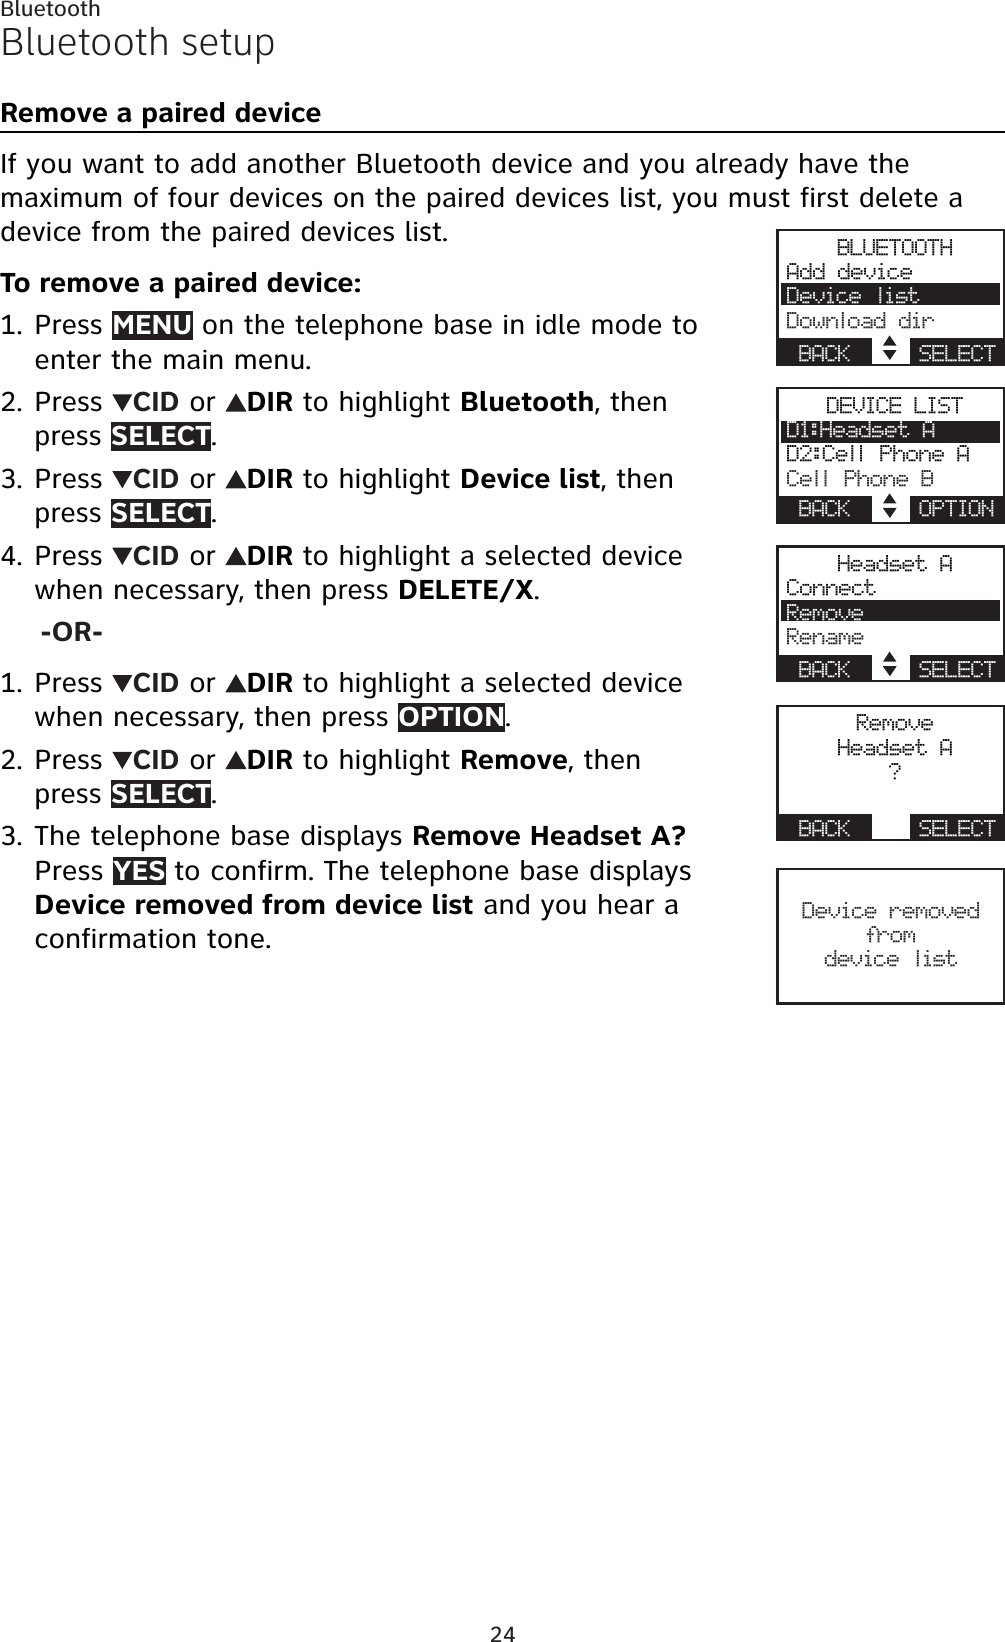 24BluetoothBluetooth setupRemove a paired deviceIf you want to add another Bluetooth device and you already have the maximum of four devices on the paired devices list, you must first delete a device from the paired devices list.To remove a paired device:Press MENU on the telephone base in idle mode to enter the main menu.Press  CID or  DIR to highlight Bluetooth, then press SELECT.Press  CID or  DIR to highlight Device list, then press SELECT.Press  CID or  DIR to highlight a selected device when necessary, then press DELETE/X.-OR-Press  CID or  DIR to highlight a selected device when necessary, then press OPTION.Press  CID or  DIR to highlight Remove, then press SELECT.The telephone base displays Remove Headset A? Press YES to confirm. The telephone base displays Device removed from device list and you hear a confirmation tone.1.2.3.4.1.2.3.BLUETOOTHAdd deviceDevice listDownload dirBACK    SELECTDEVICE LISTD1:Headset AD2:Cell Phone ACell Phone BBACK    OPTIONHeadset AConnectRemoveRenameBACK    SELECTRemoveHeadset A?BACK    SELECTDevice removed from device list